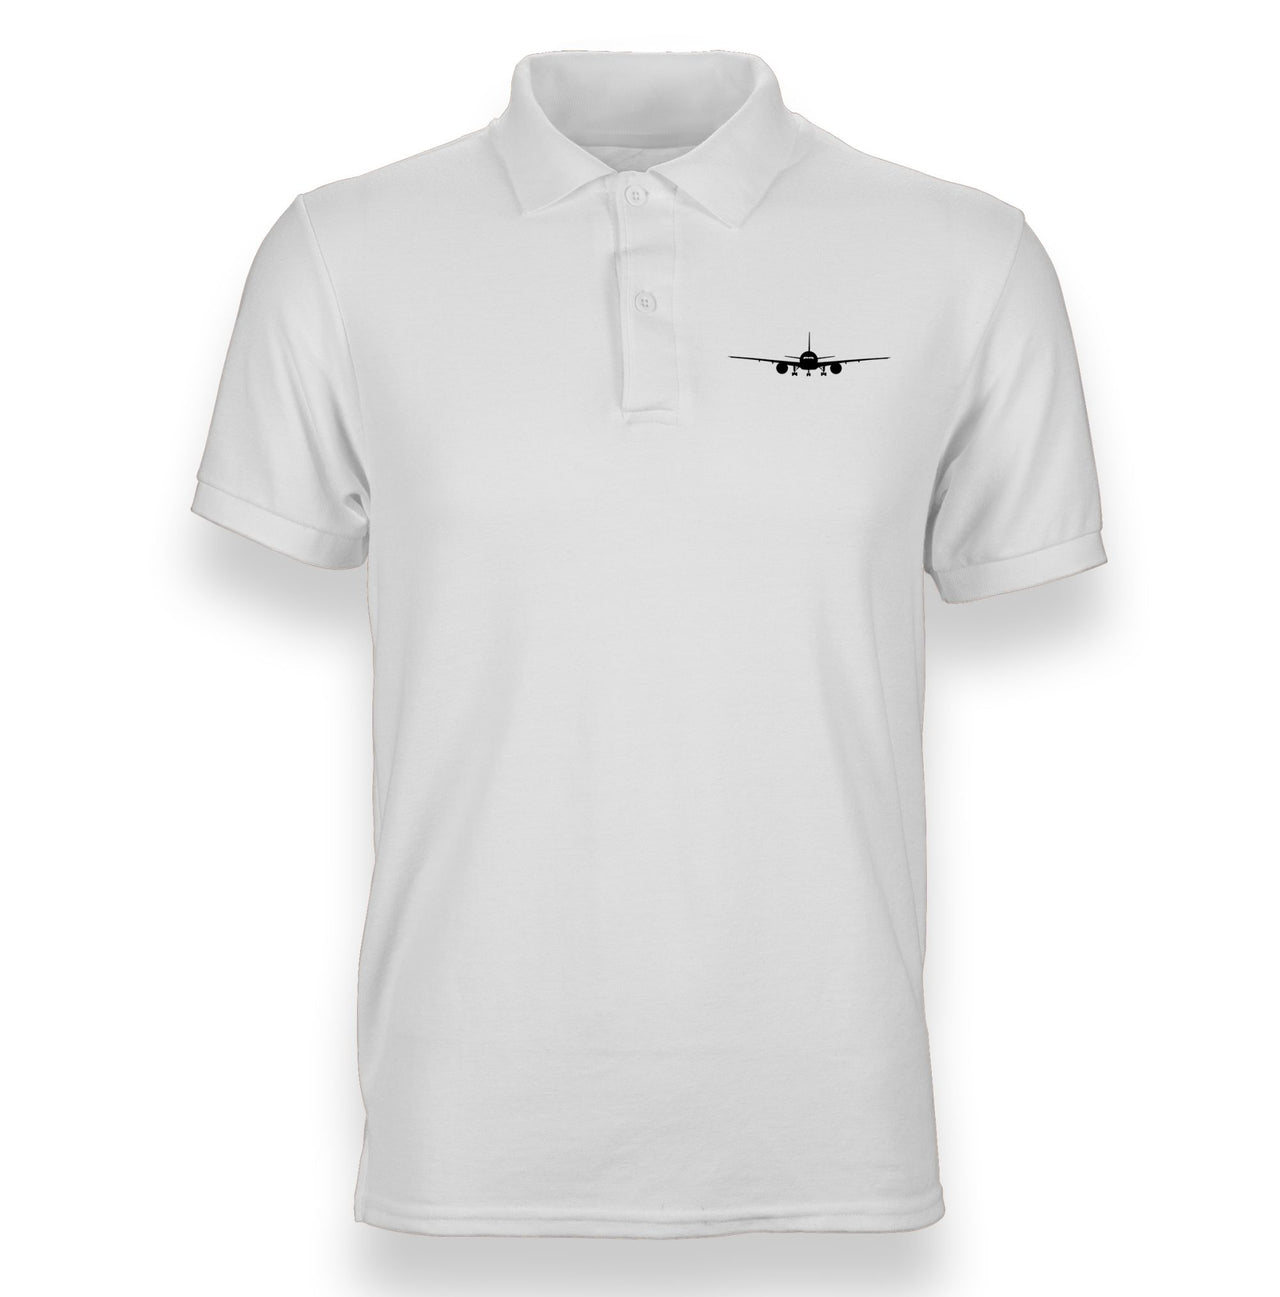 Boeing 777 Silhouette Designed "WOMEN" Polo T-Shirts